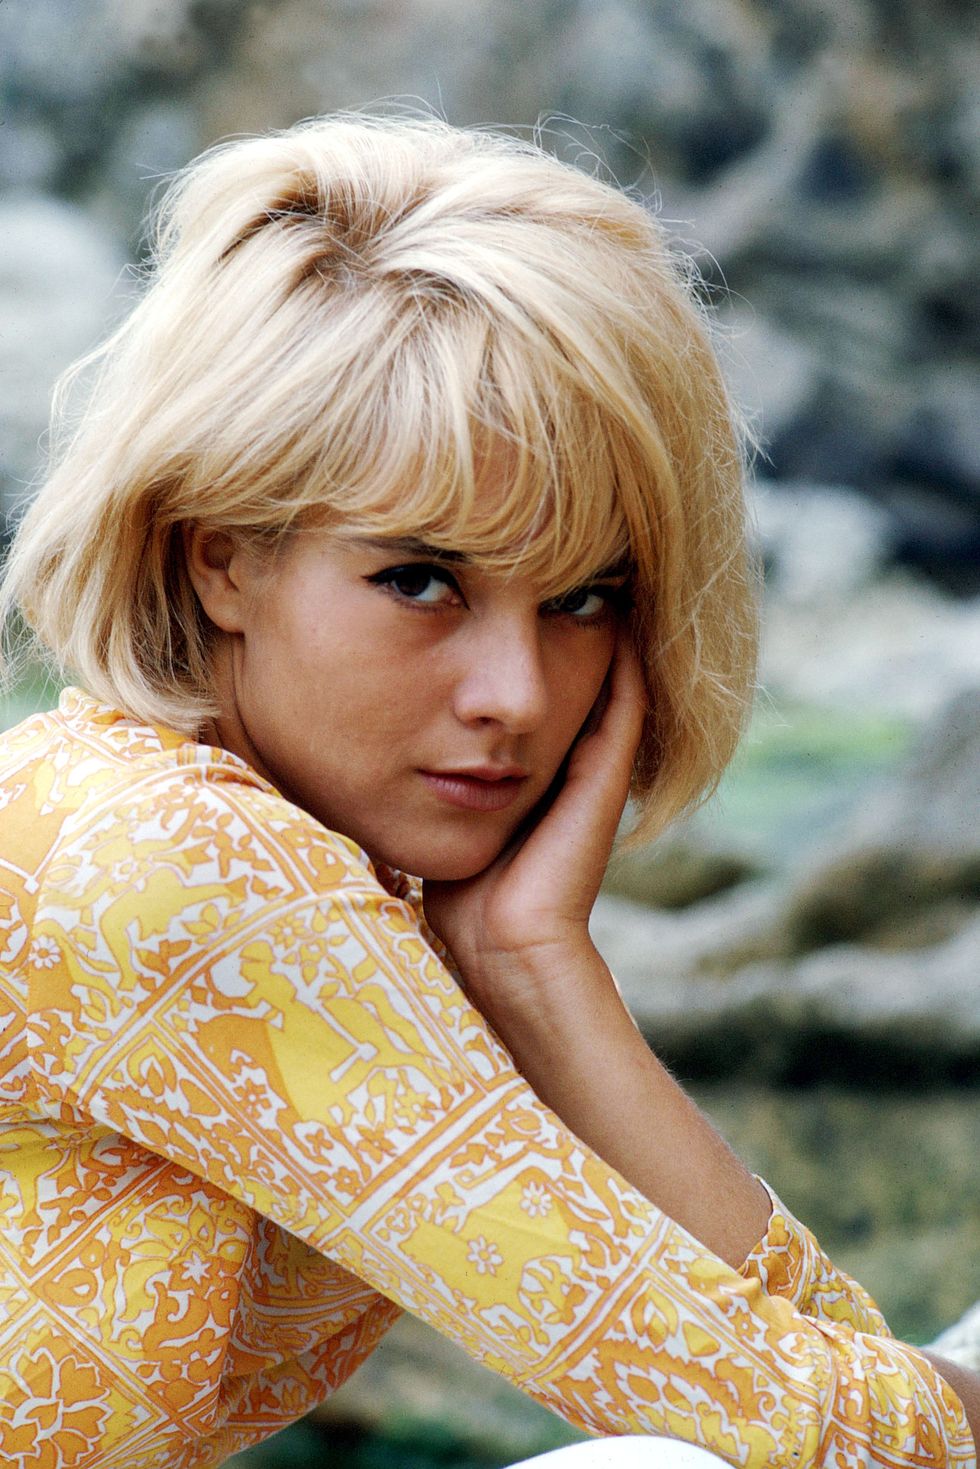 sylvie vartan in 1960s photo by picotgamma rapho via getty images